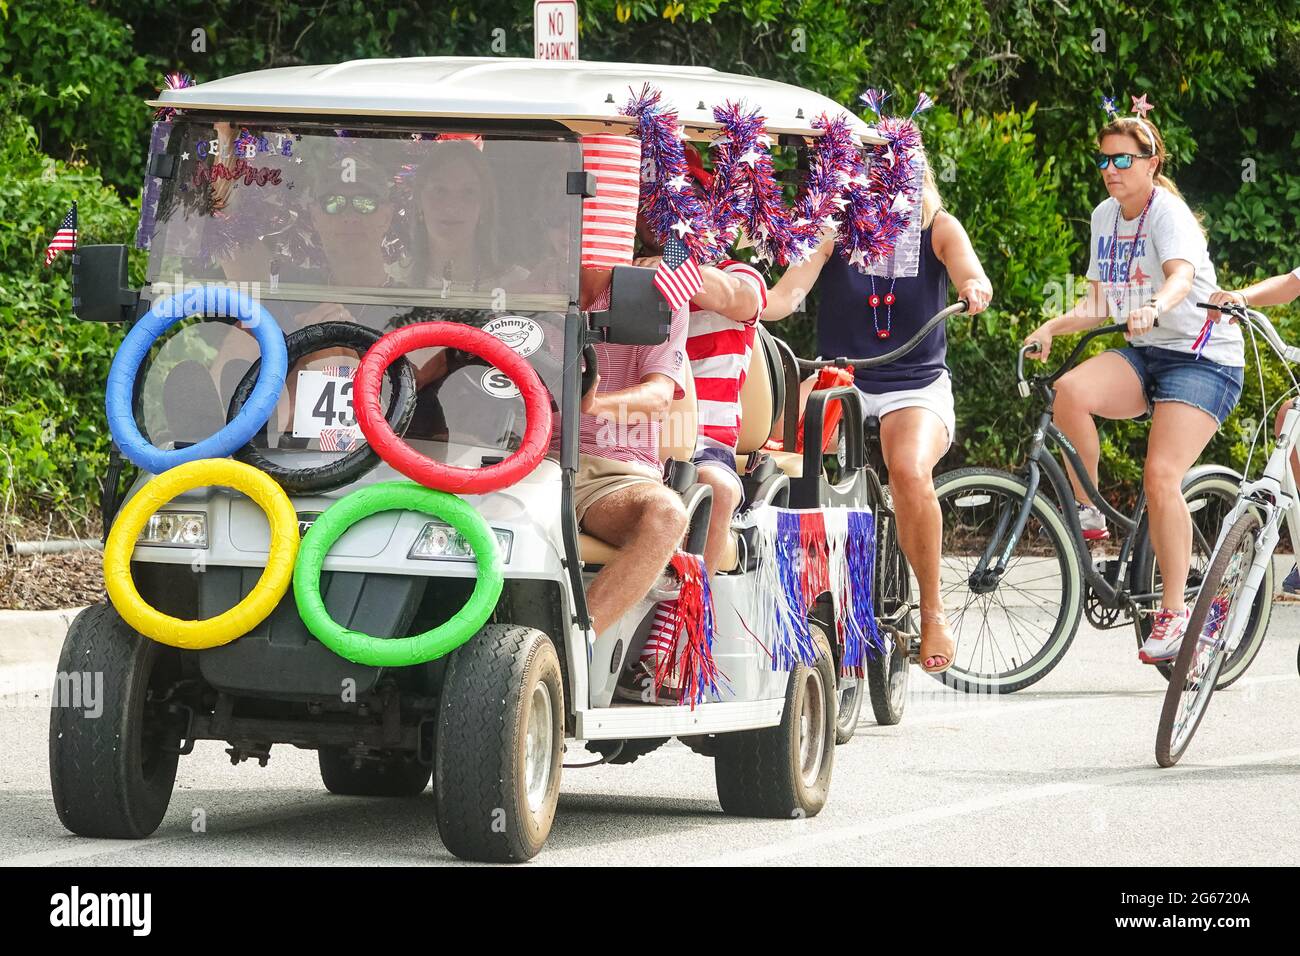 Sullivans Island, South Carolina, USA. 3rd July, 2021. A family drives their golf cart decorated in the Olympic Games theme during the annual Bicycle and Golf cart parade celebrating Independence Day July 3, 2021 in Sullivans Island, South Carolina. Credit: Planetpix/Alamy Live News Stock Photo